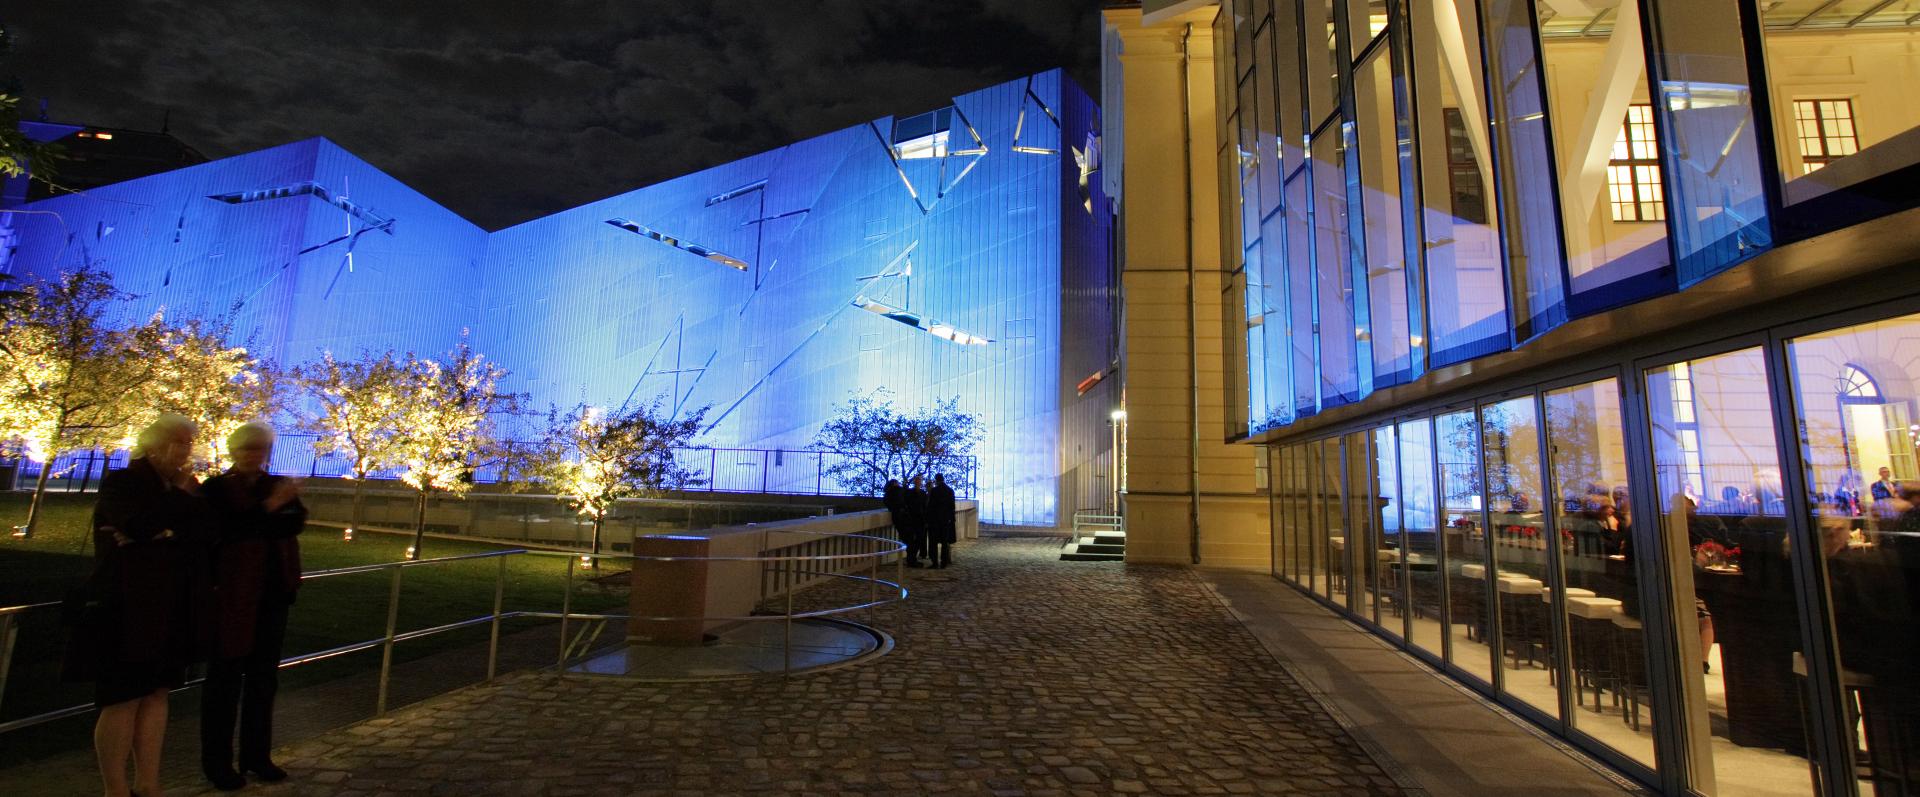 Libeskind Building and the Glass Courtyard at night (illuminated by blue light)